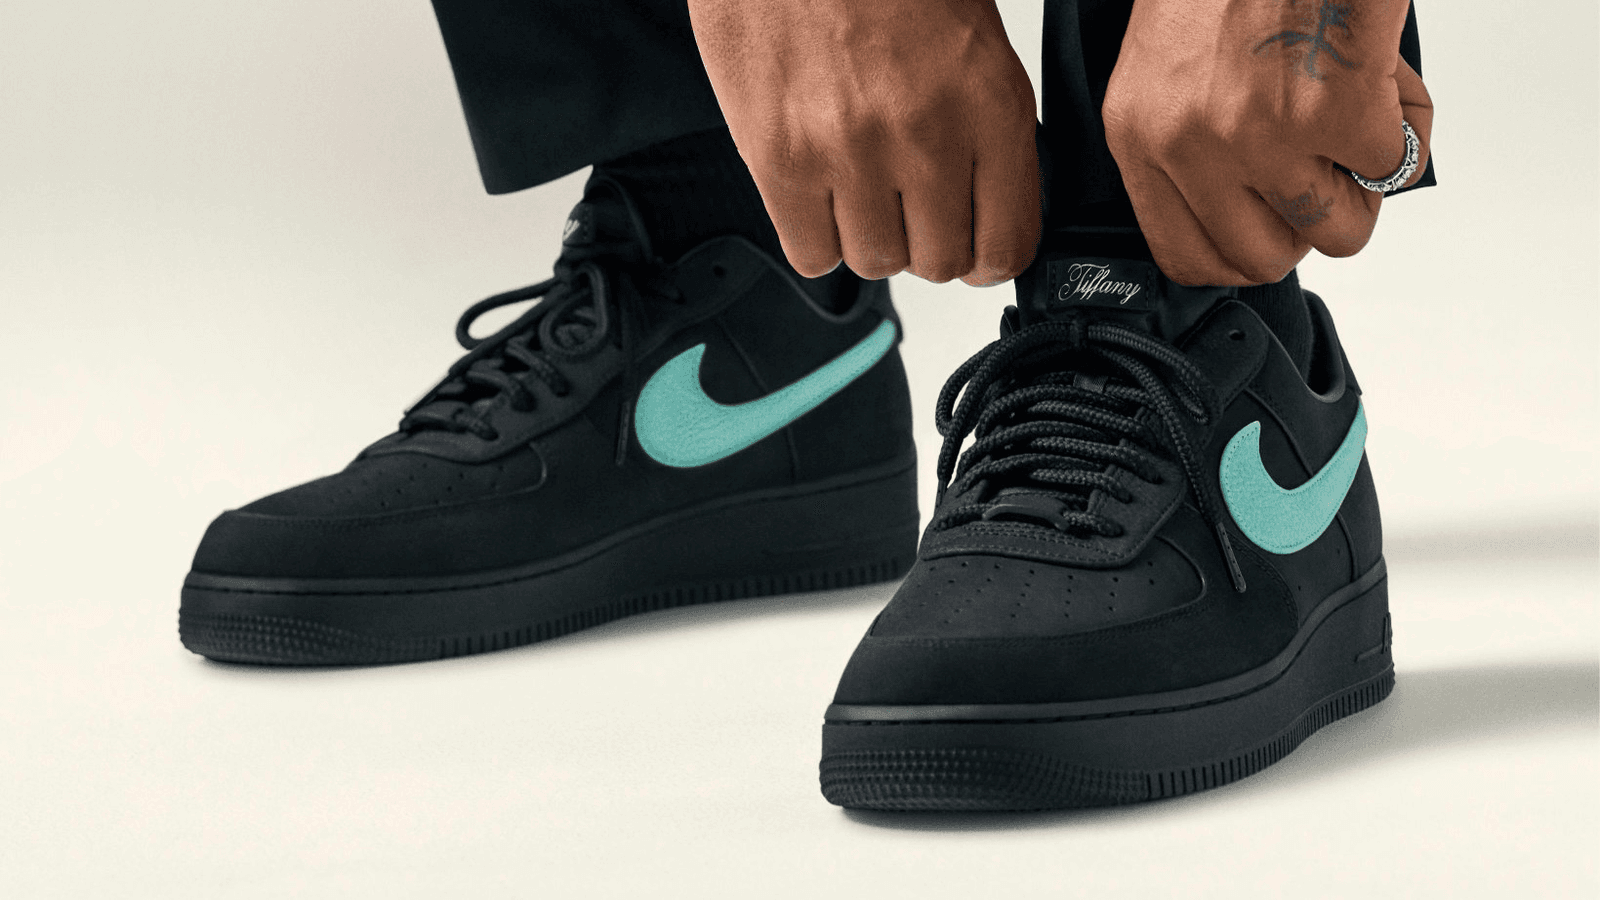 Only 💲400 for Nike x Tiffany Air Force 1's? 😧